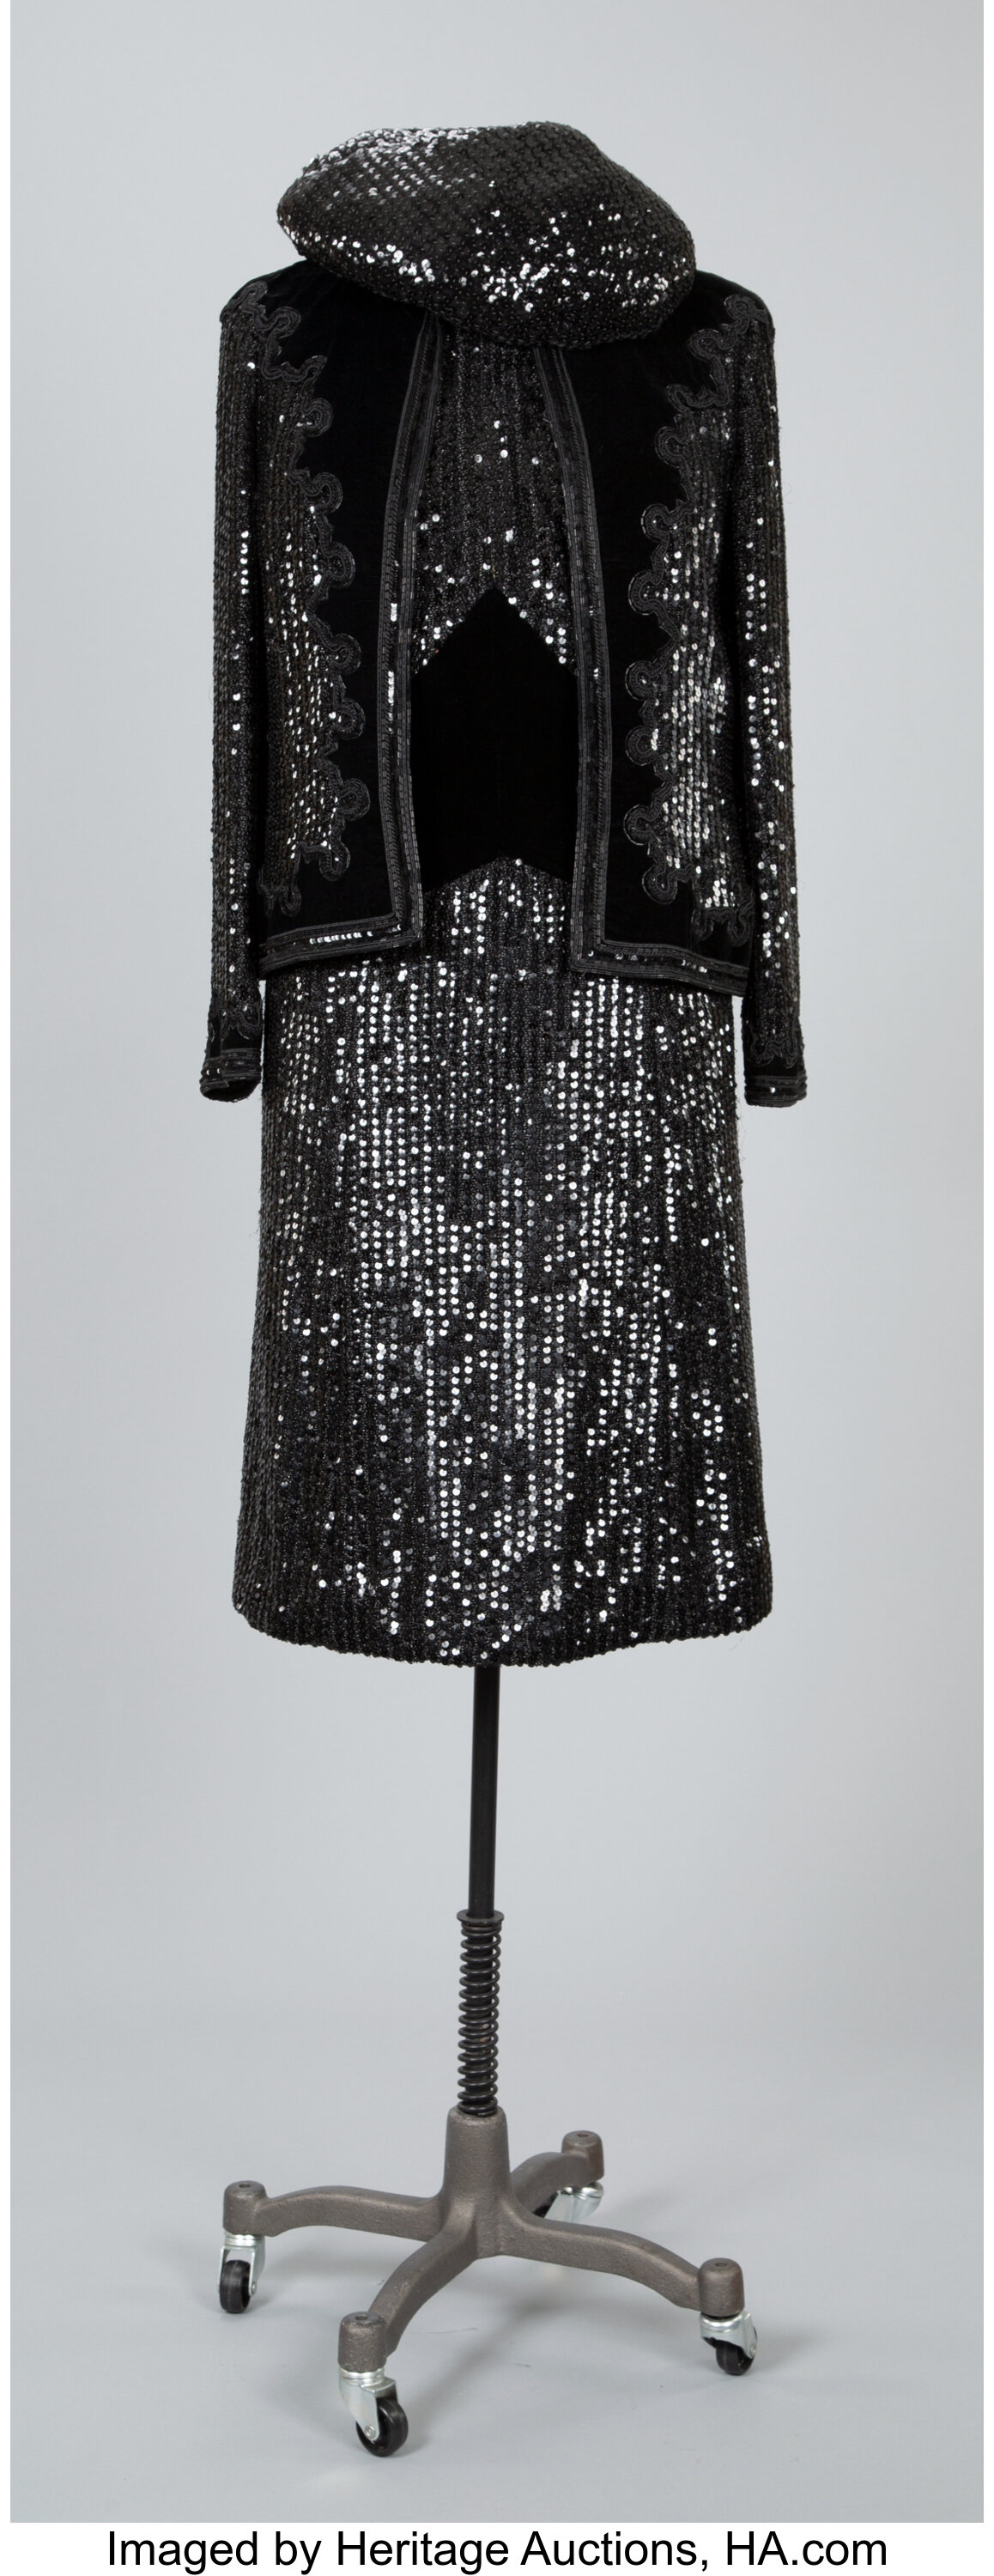 A Coco Chanel Two-Piece Velvet and Sequined Dress with Coco Chanel